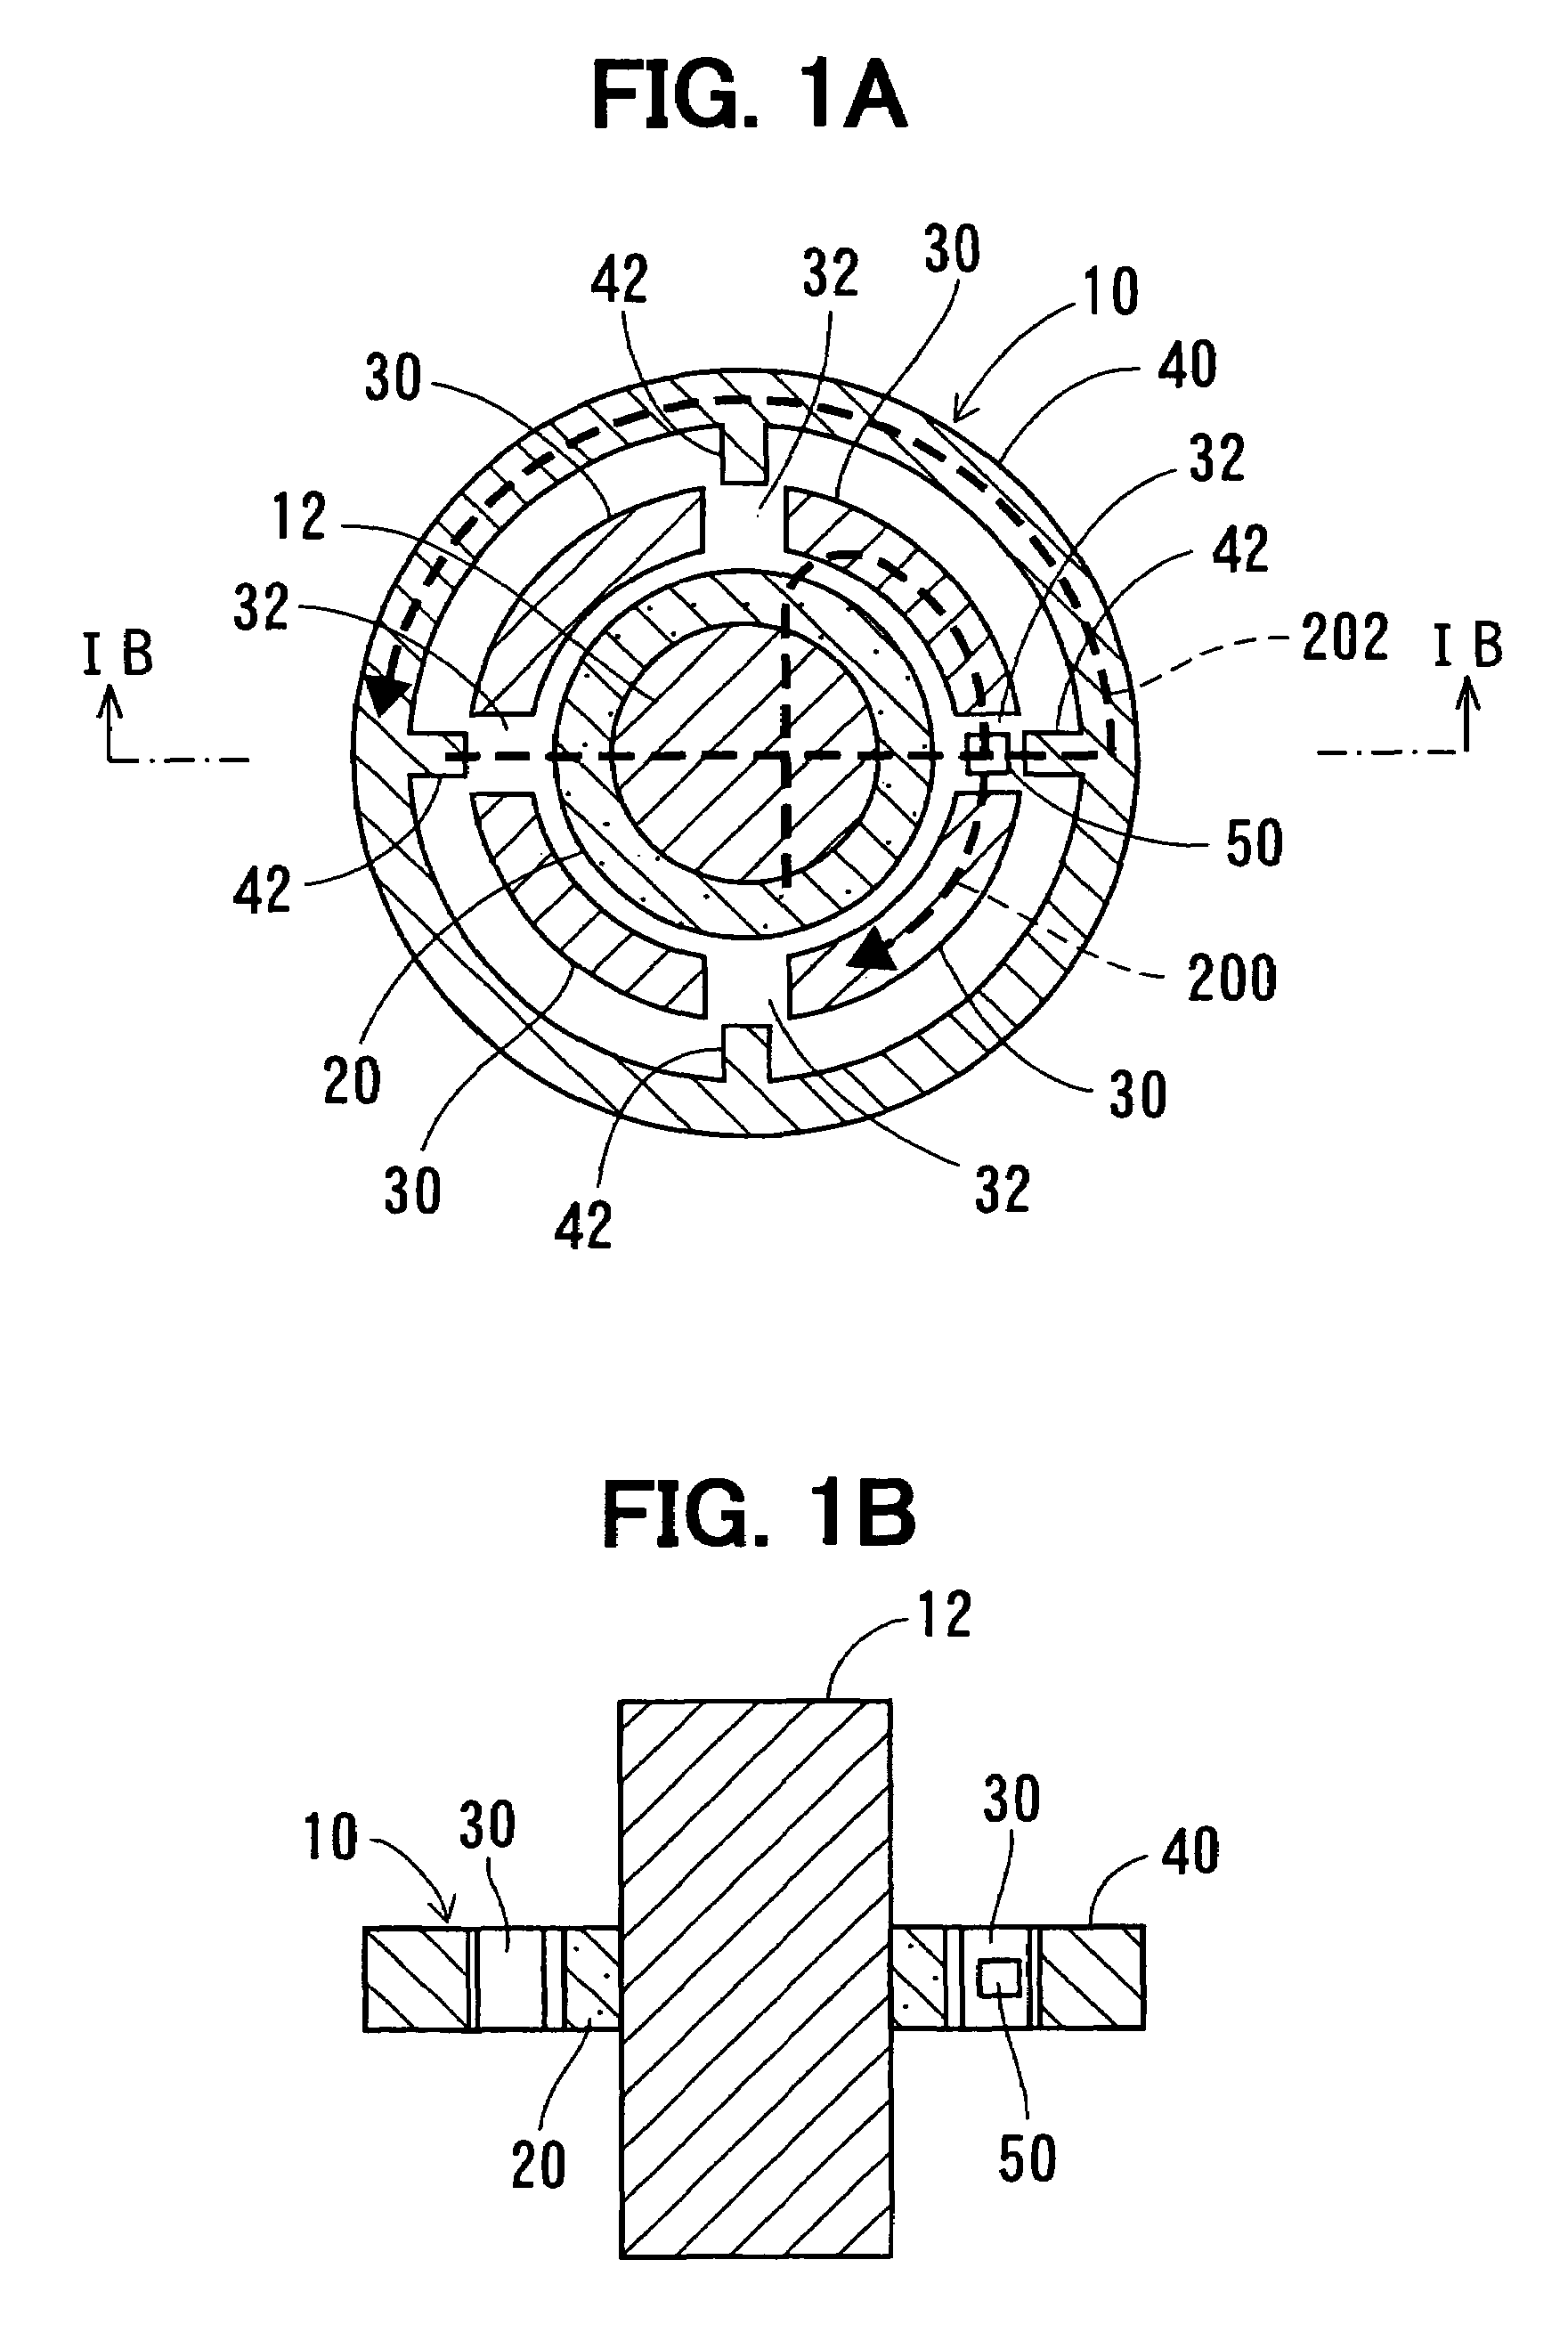 Rotation angle using orthogonal magnetic sensing elements in close proximity to each other